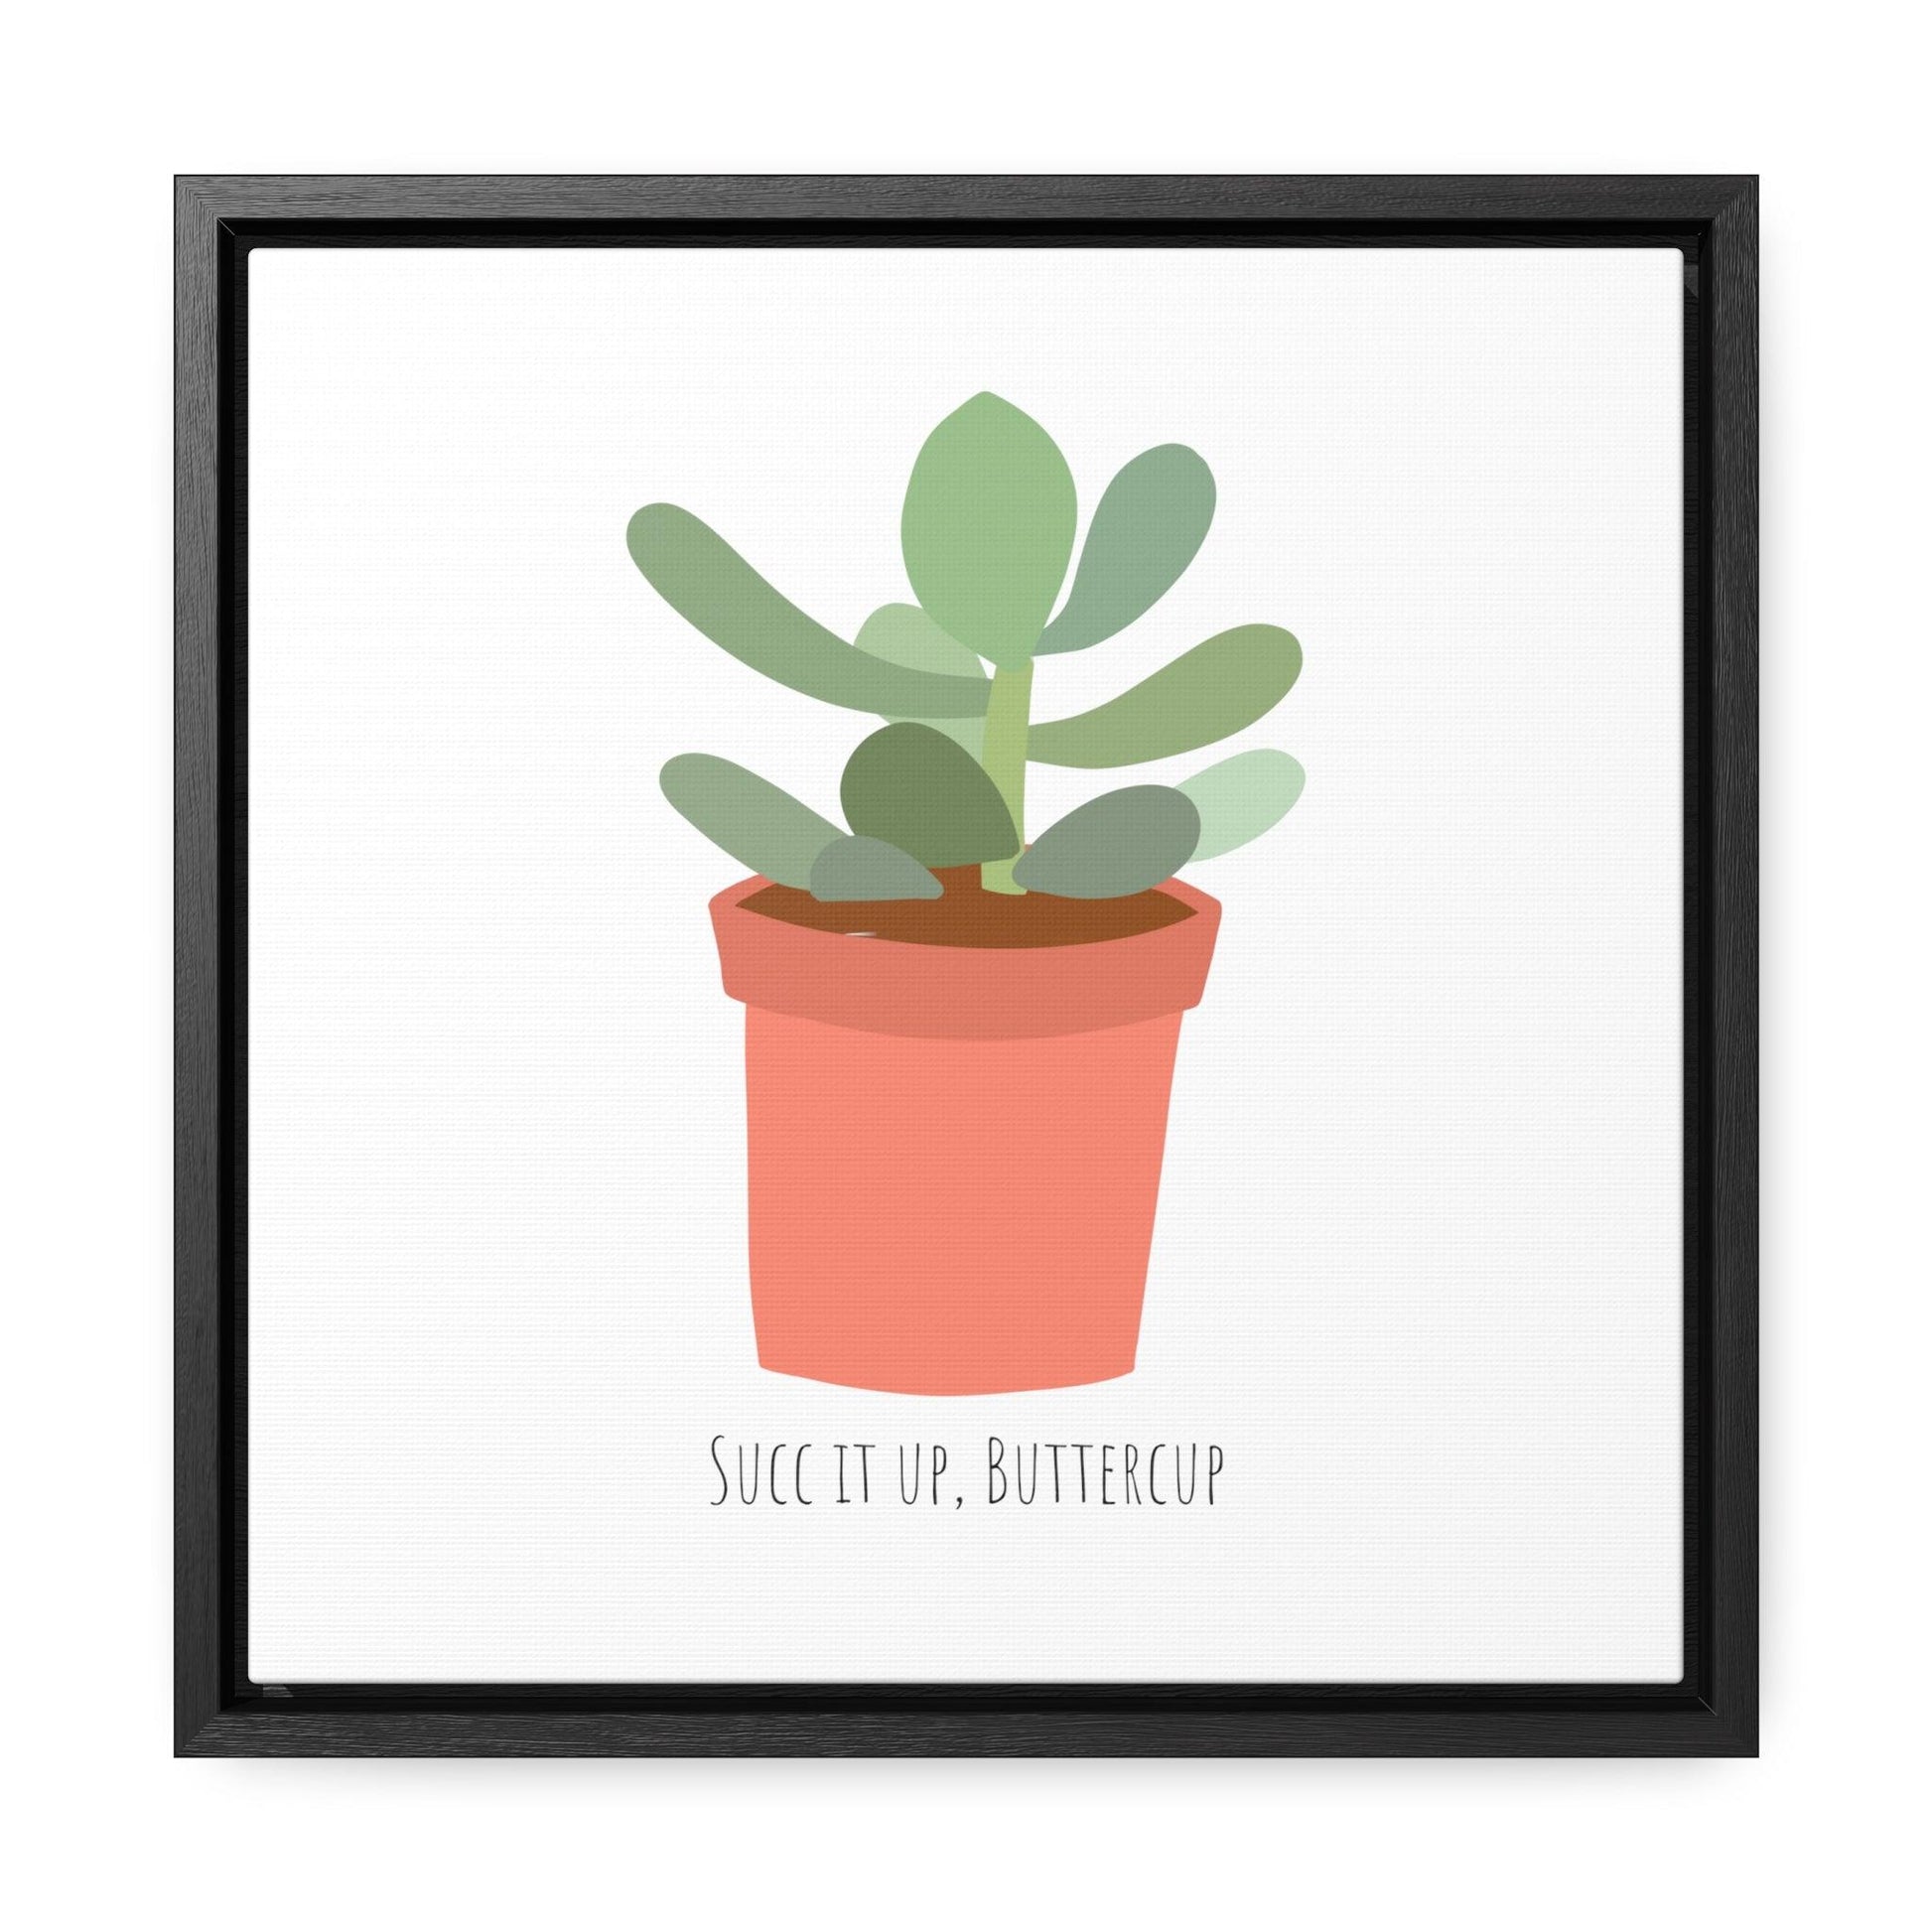 Succ it up, Buttercup - Gallery Canvas Wraps, Square Frame - Moxie Graphics